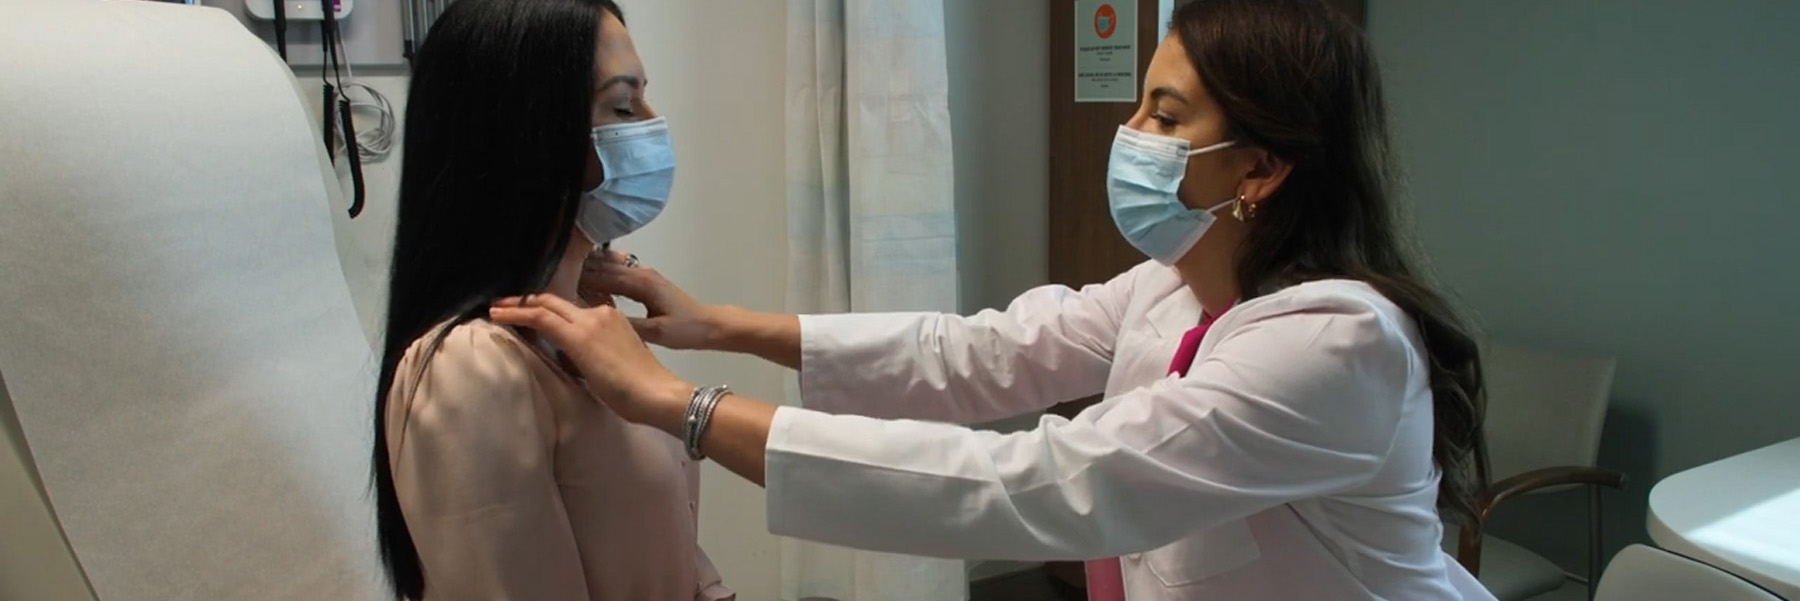 Female cancer patient receives hands-on medical care from a female doctor